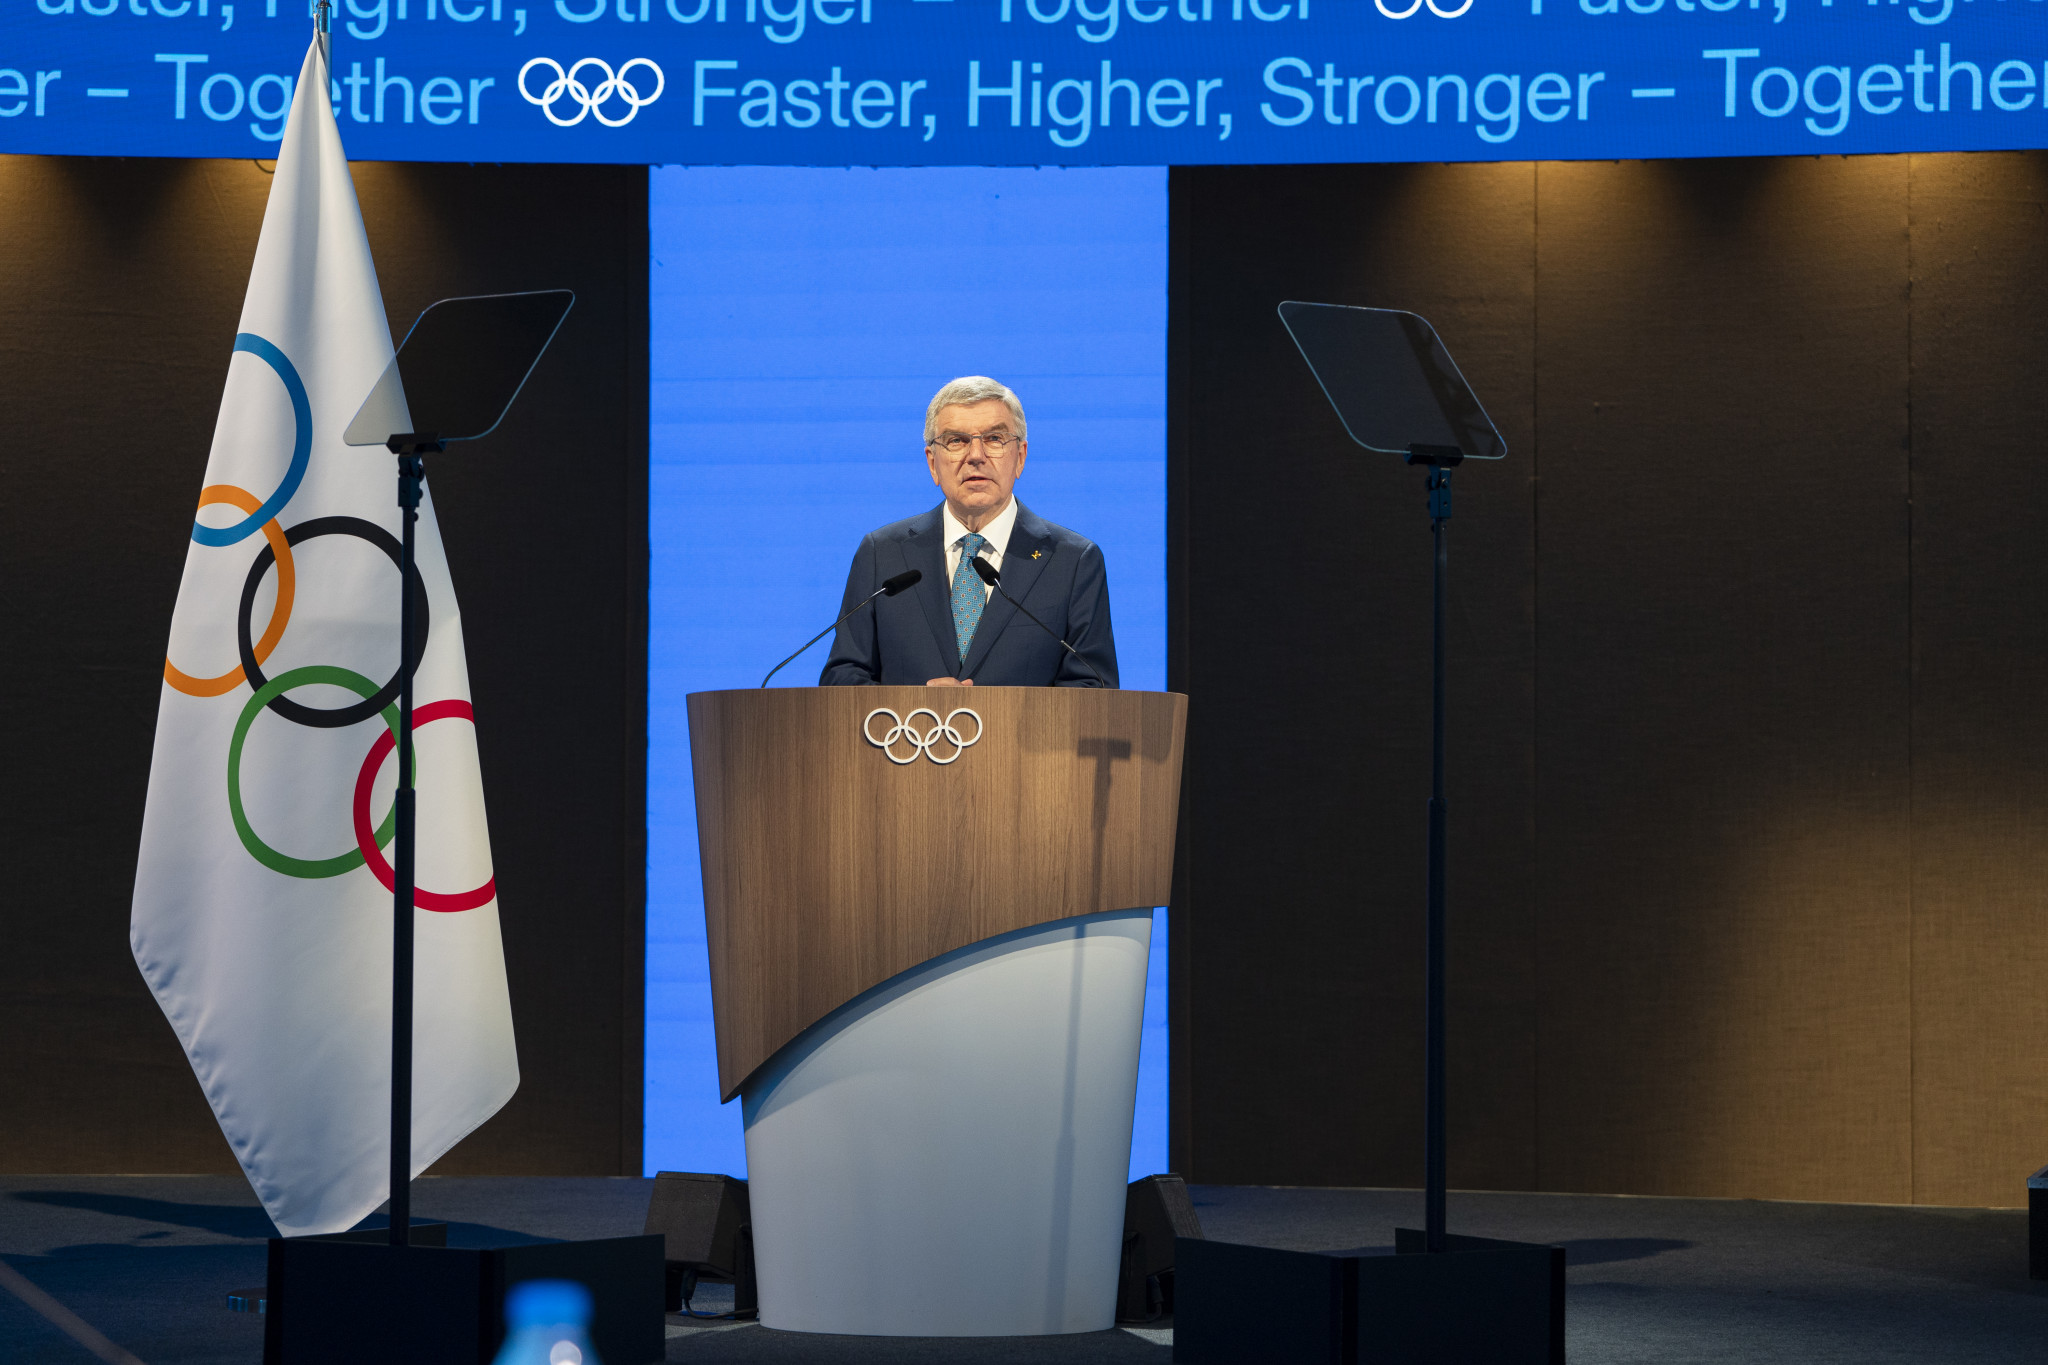 insidethegames is reporting LIVE from the 141st IOC Session in Mumbai